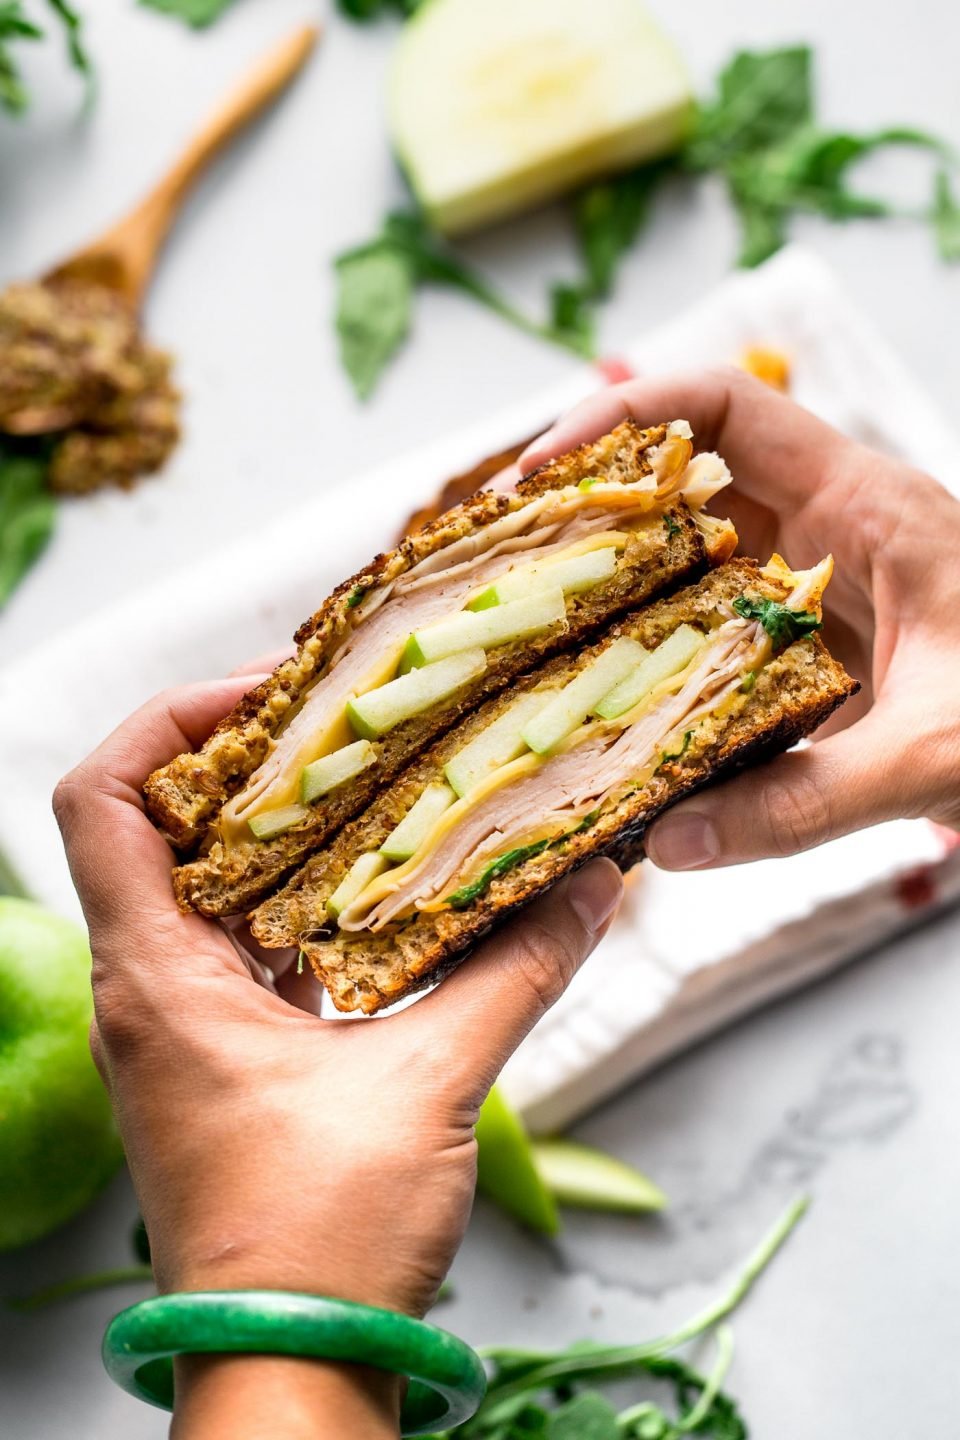 A woman's hand holds two halves stacked of an Autumn Grilled Cheese Sandwich. This apple grilled cheese contains gouda cheese, granny smith apples, whole grain mustard, smoked turkey, & arugula. Out of focus & in the background there is a white linen napkin, pieces of granny smith apple, a wooden spoon filled with mustard, & pieces of arugula resting on a grey plaster surface.